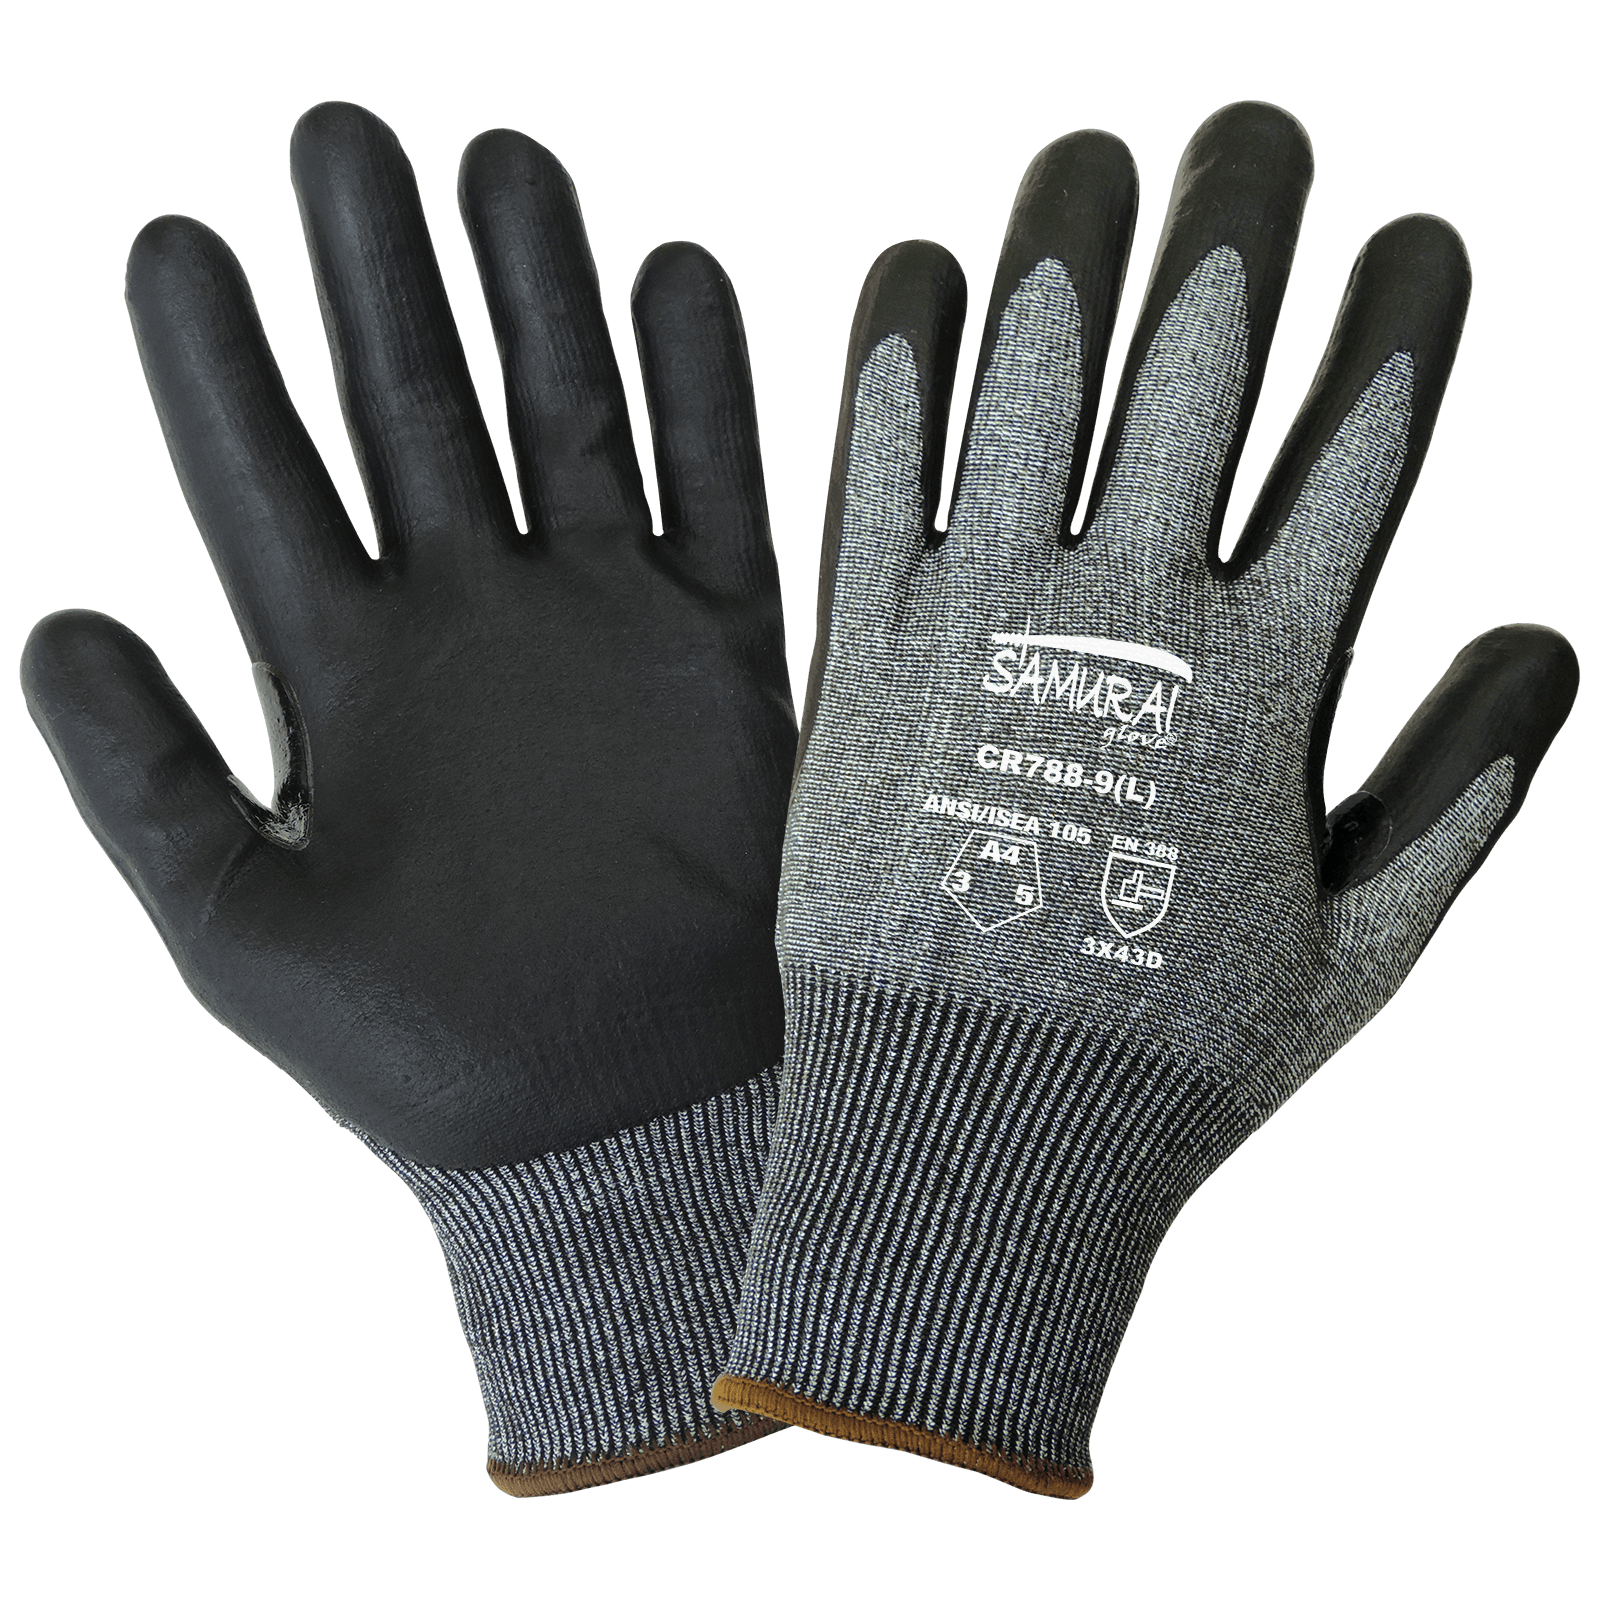 Samurai Glove® Touch Screen Compatible Cut, Abrasion, and Puncture Resistant Glove